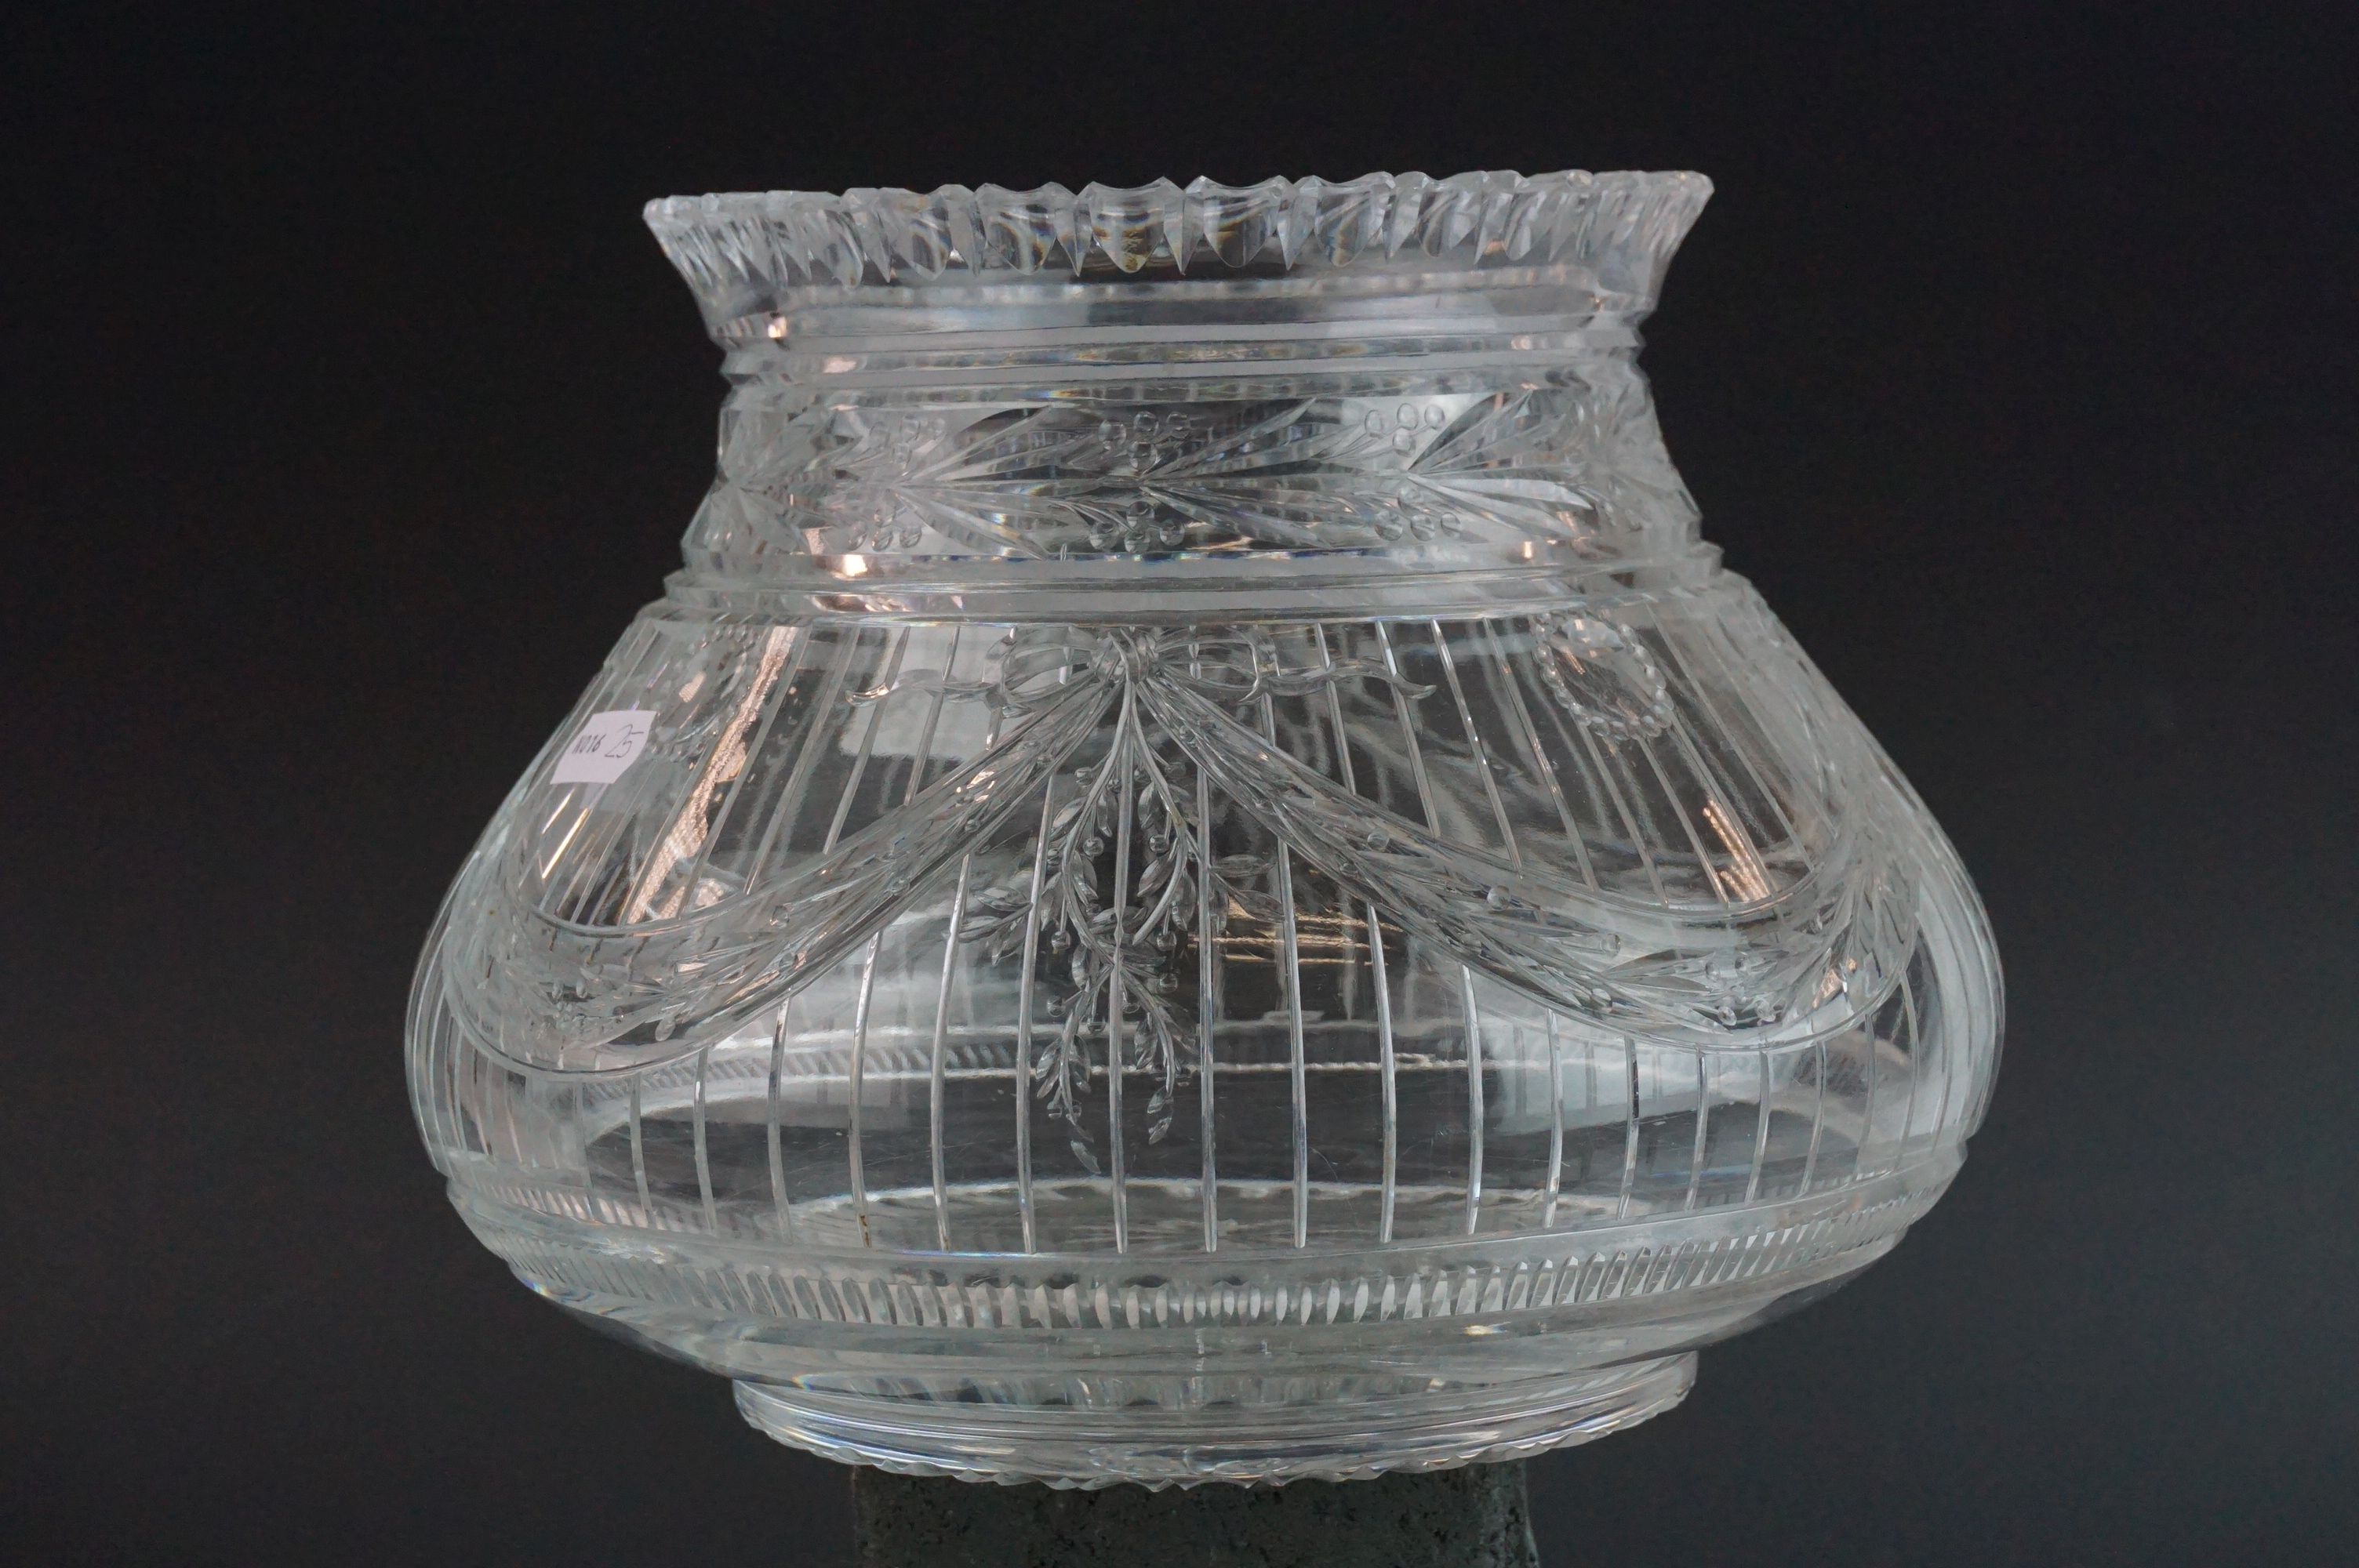 Webb glass vase, the squat ovoid body engraved with ribbons